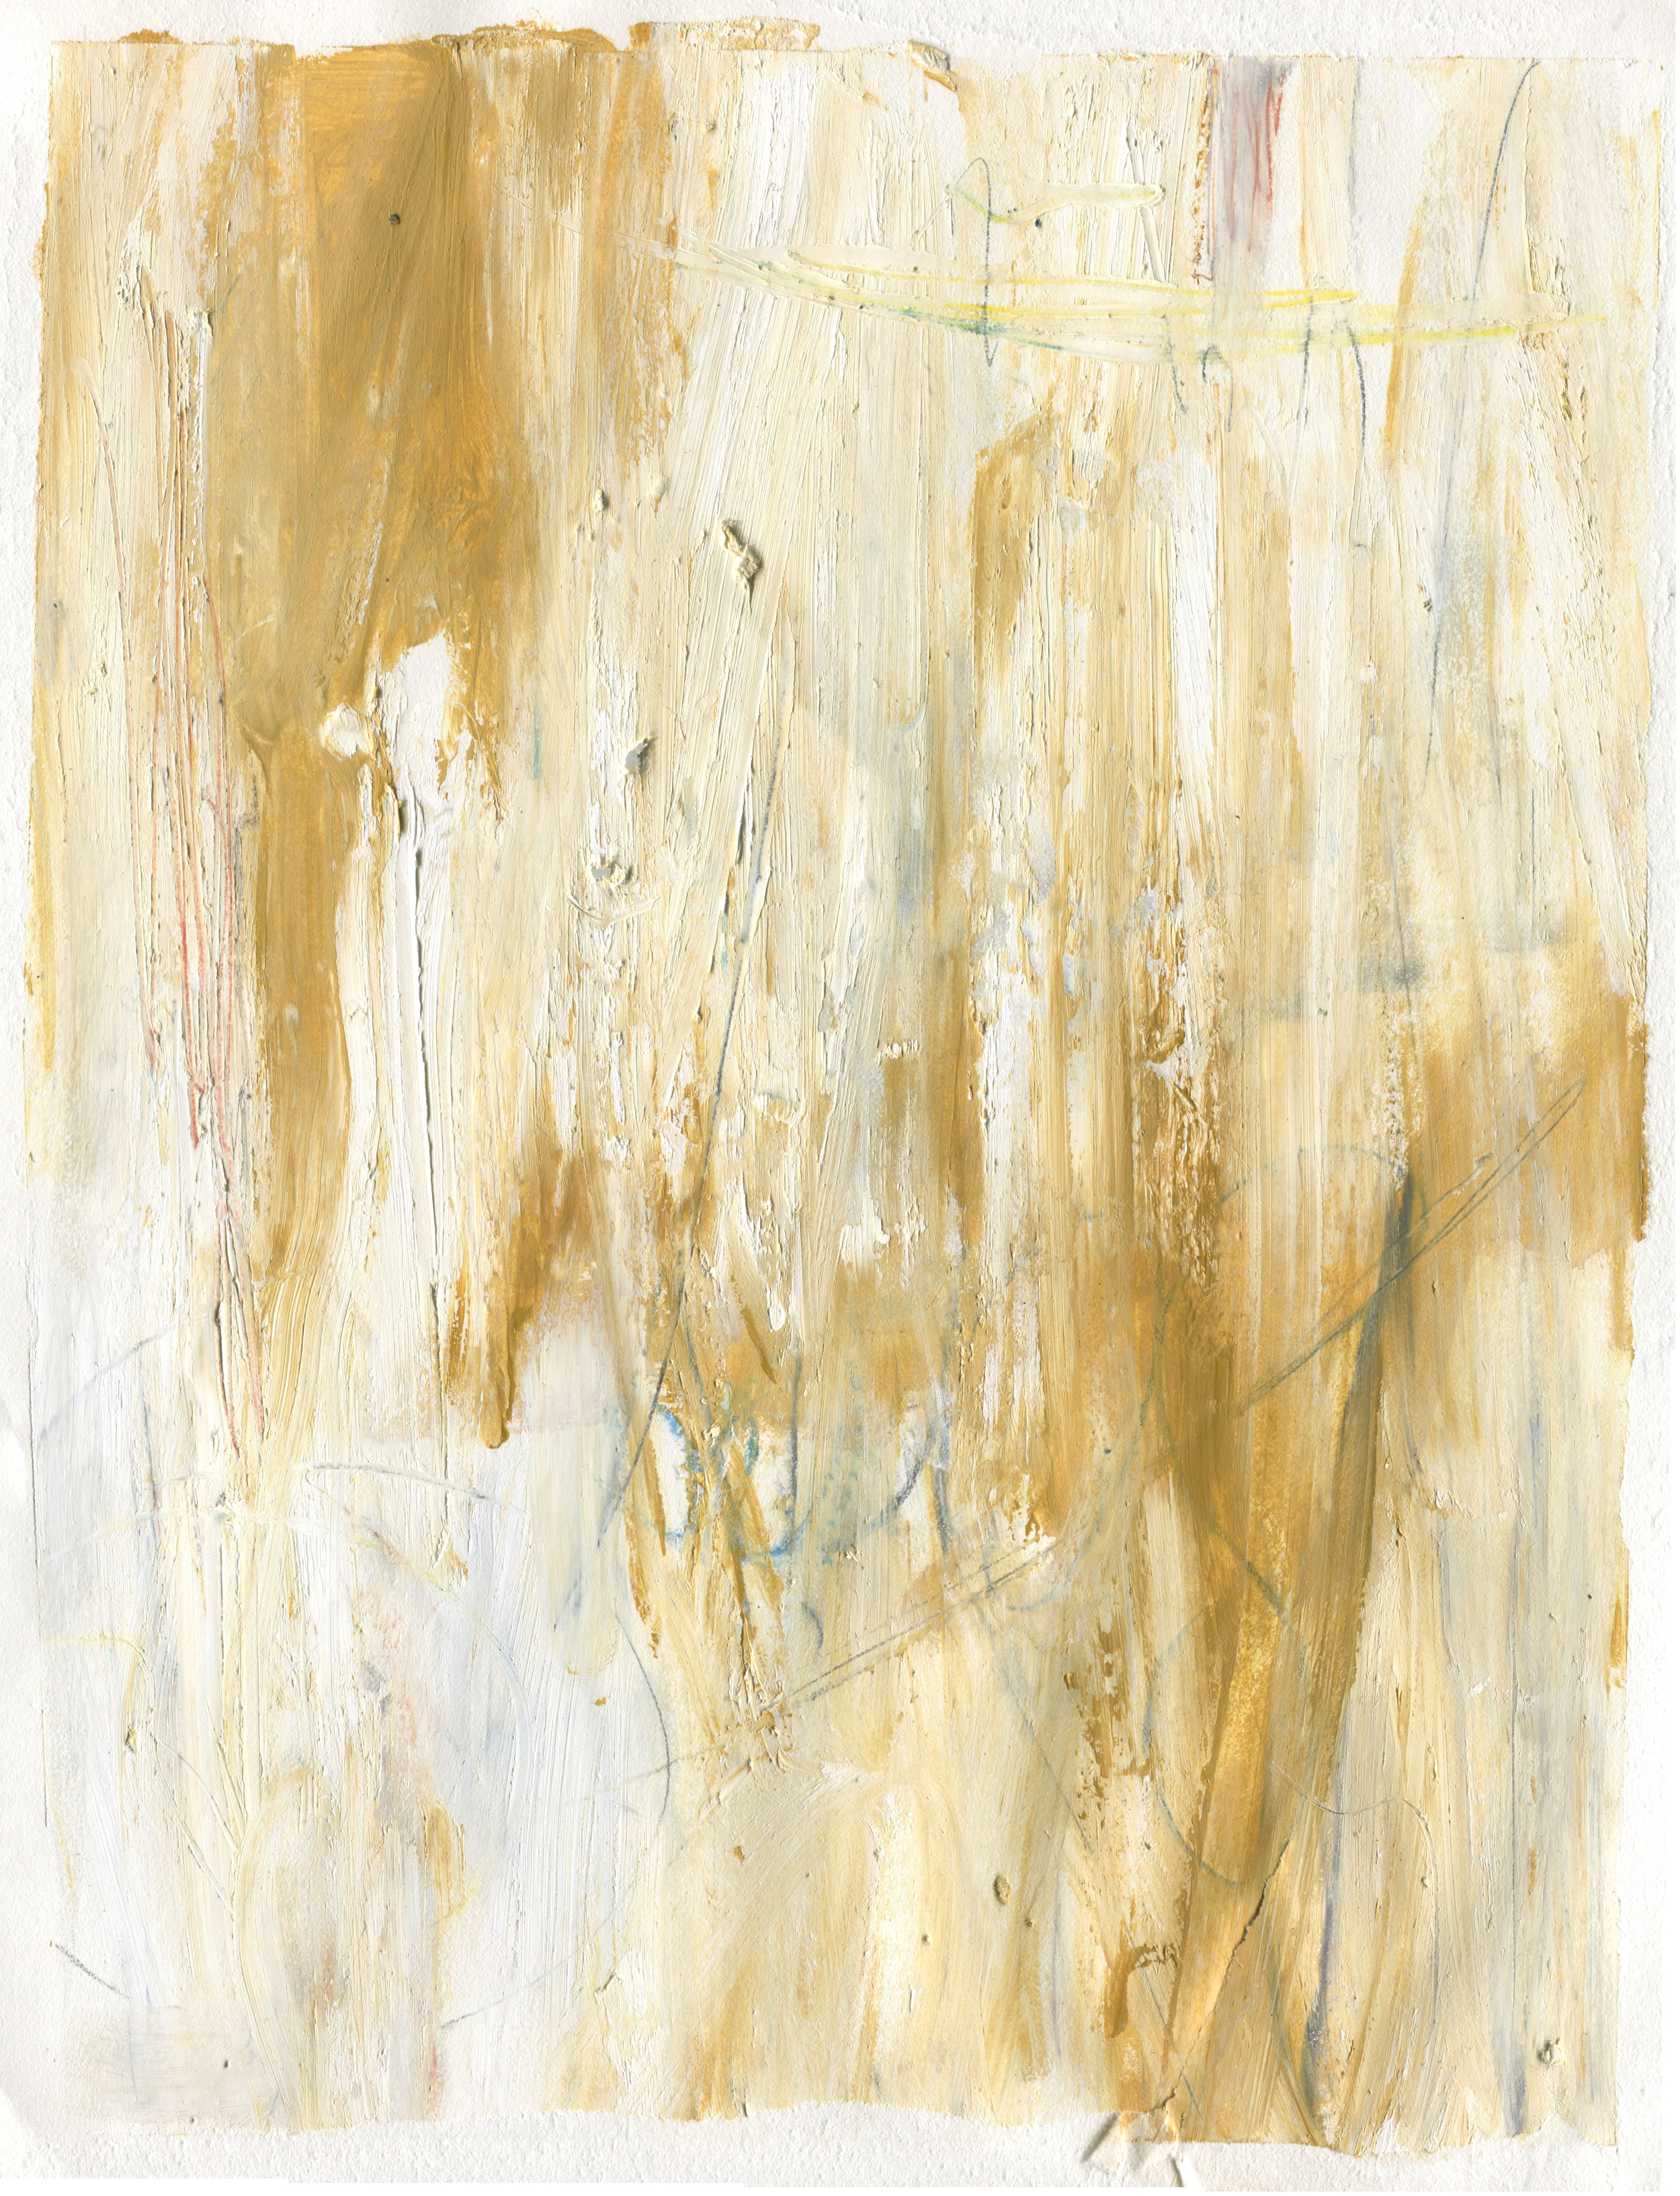   Yellow Melancholy , 2016  14 x 11 inches  Gouache, Oil Stick, Crayon, Graphite, and Colored Pencil on Paper  Private Collection  &nbsp; 